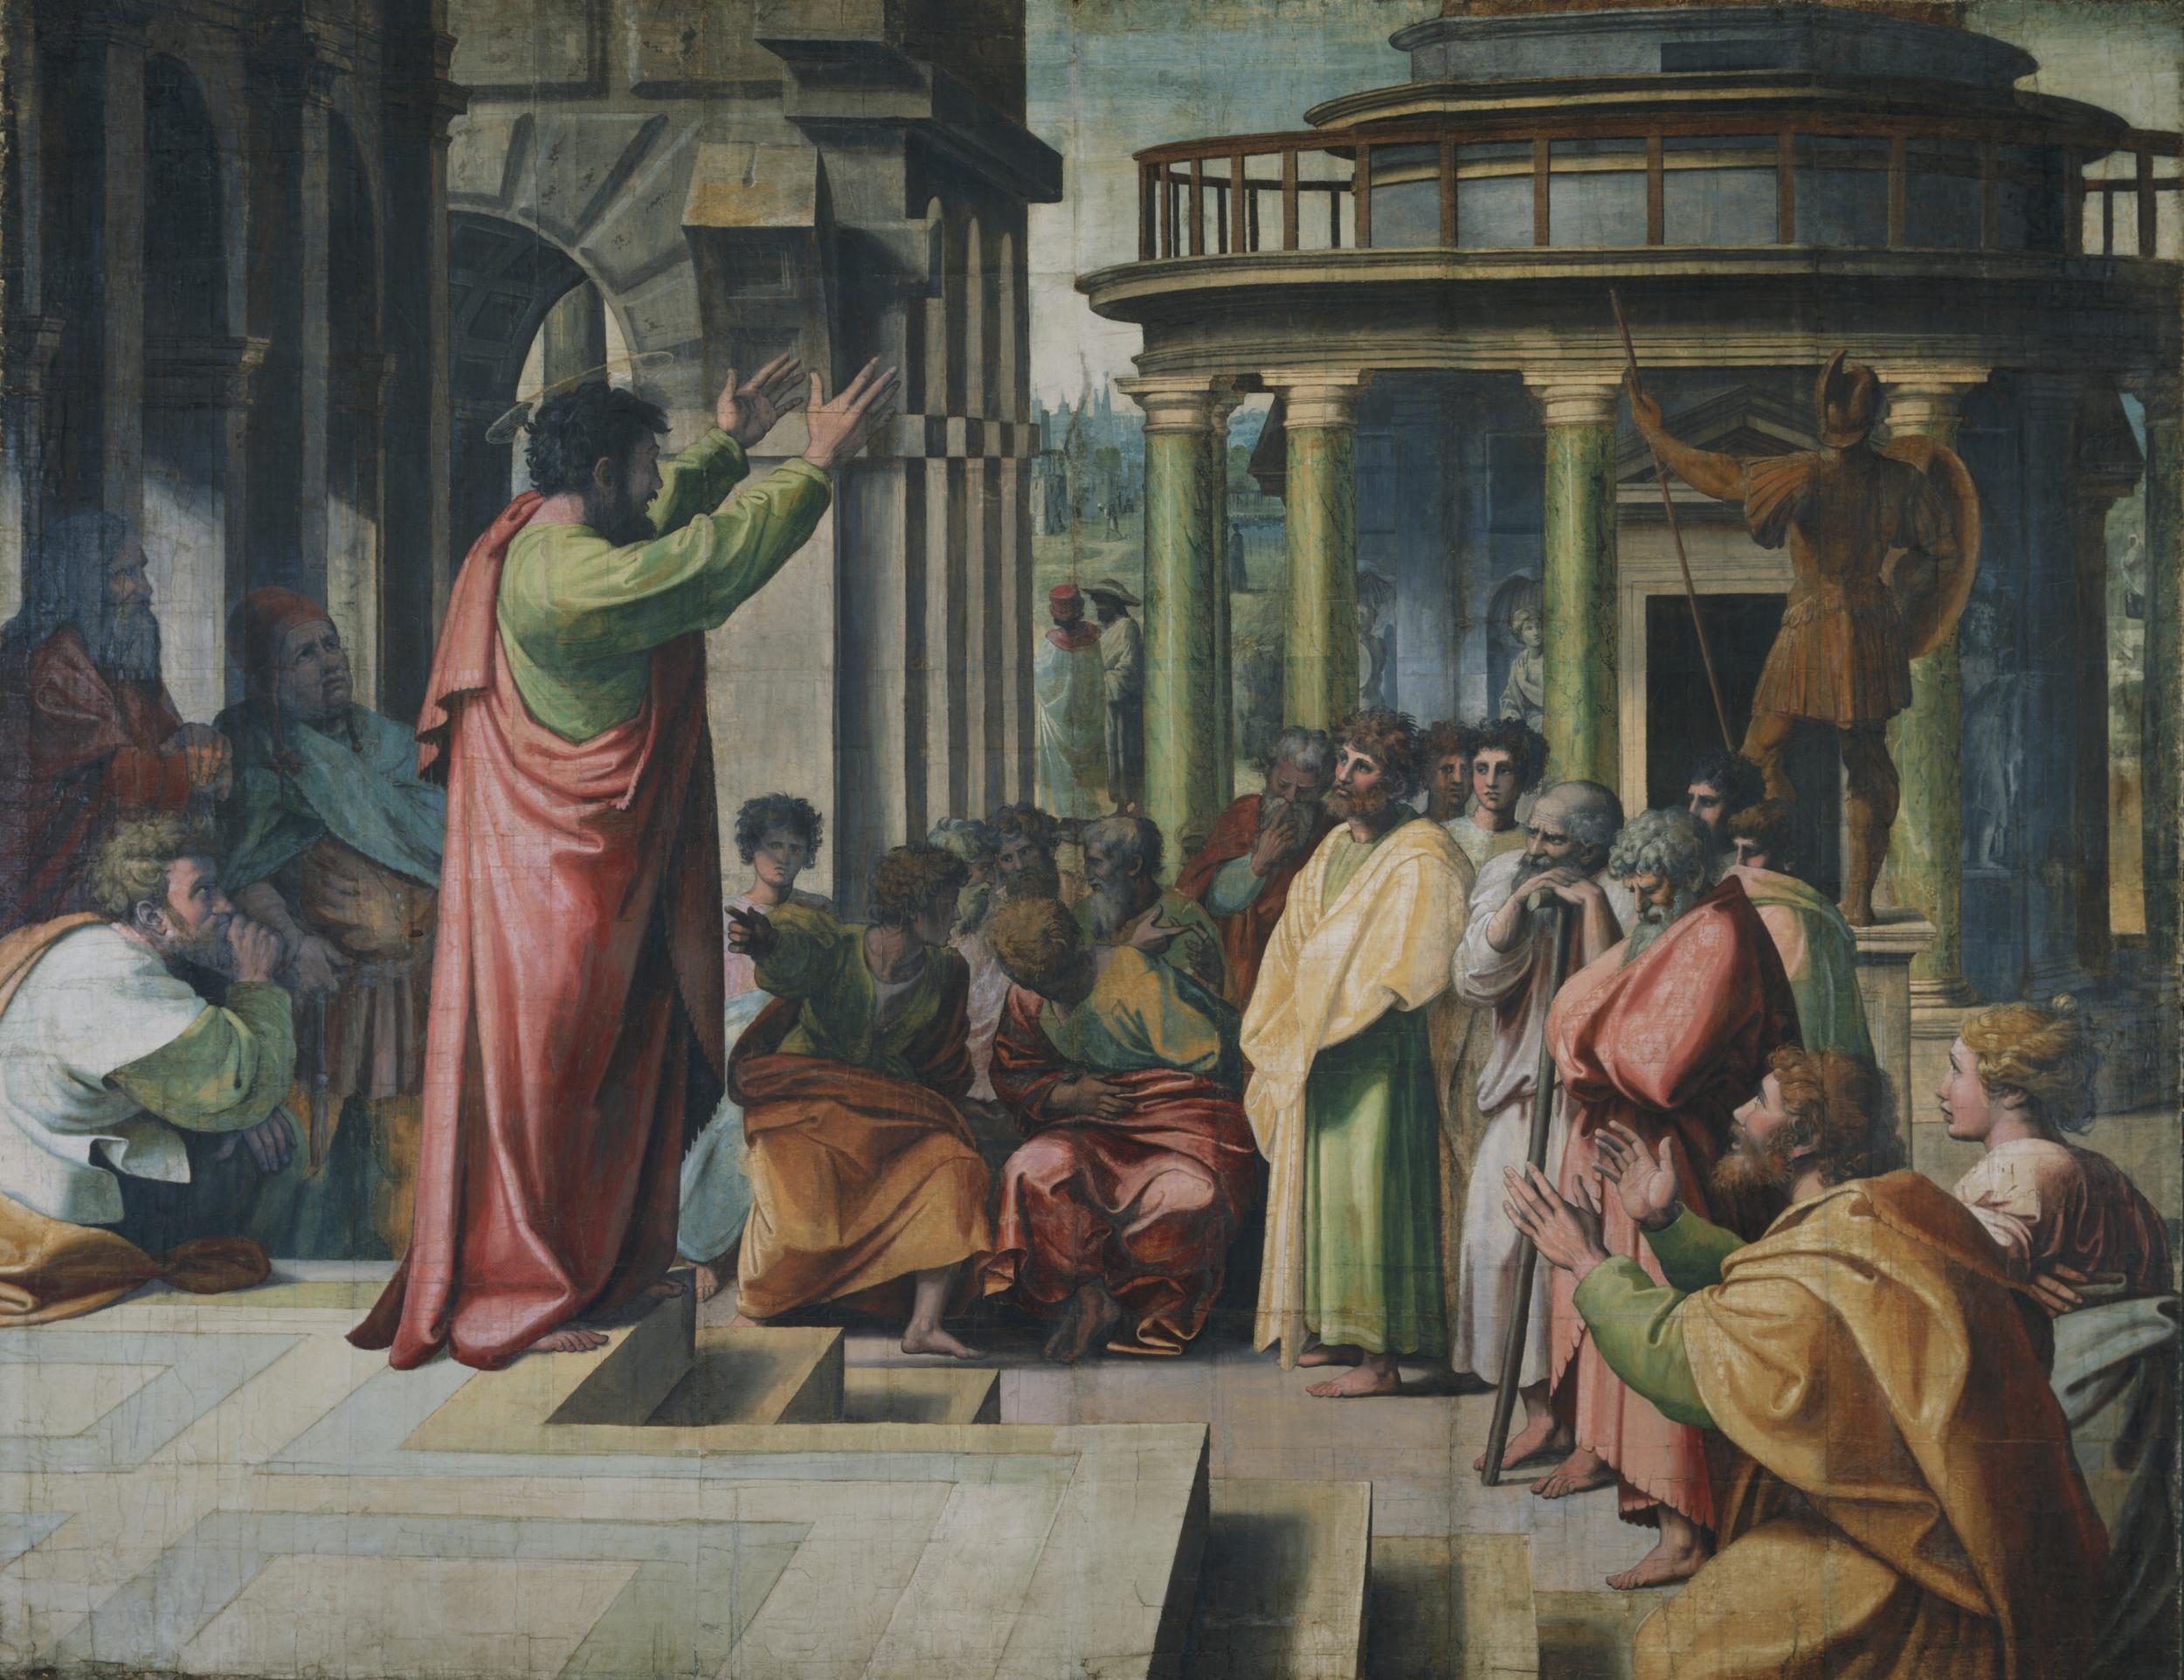 A muted color painting of Saint Paul preaching on a set of steps before a group of light-skinned men dressed in classical drapery, in various poses of attention and debate.